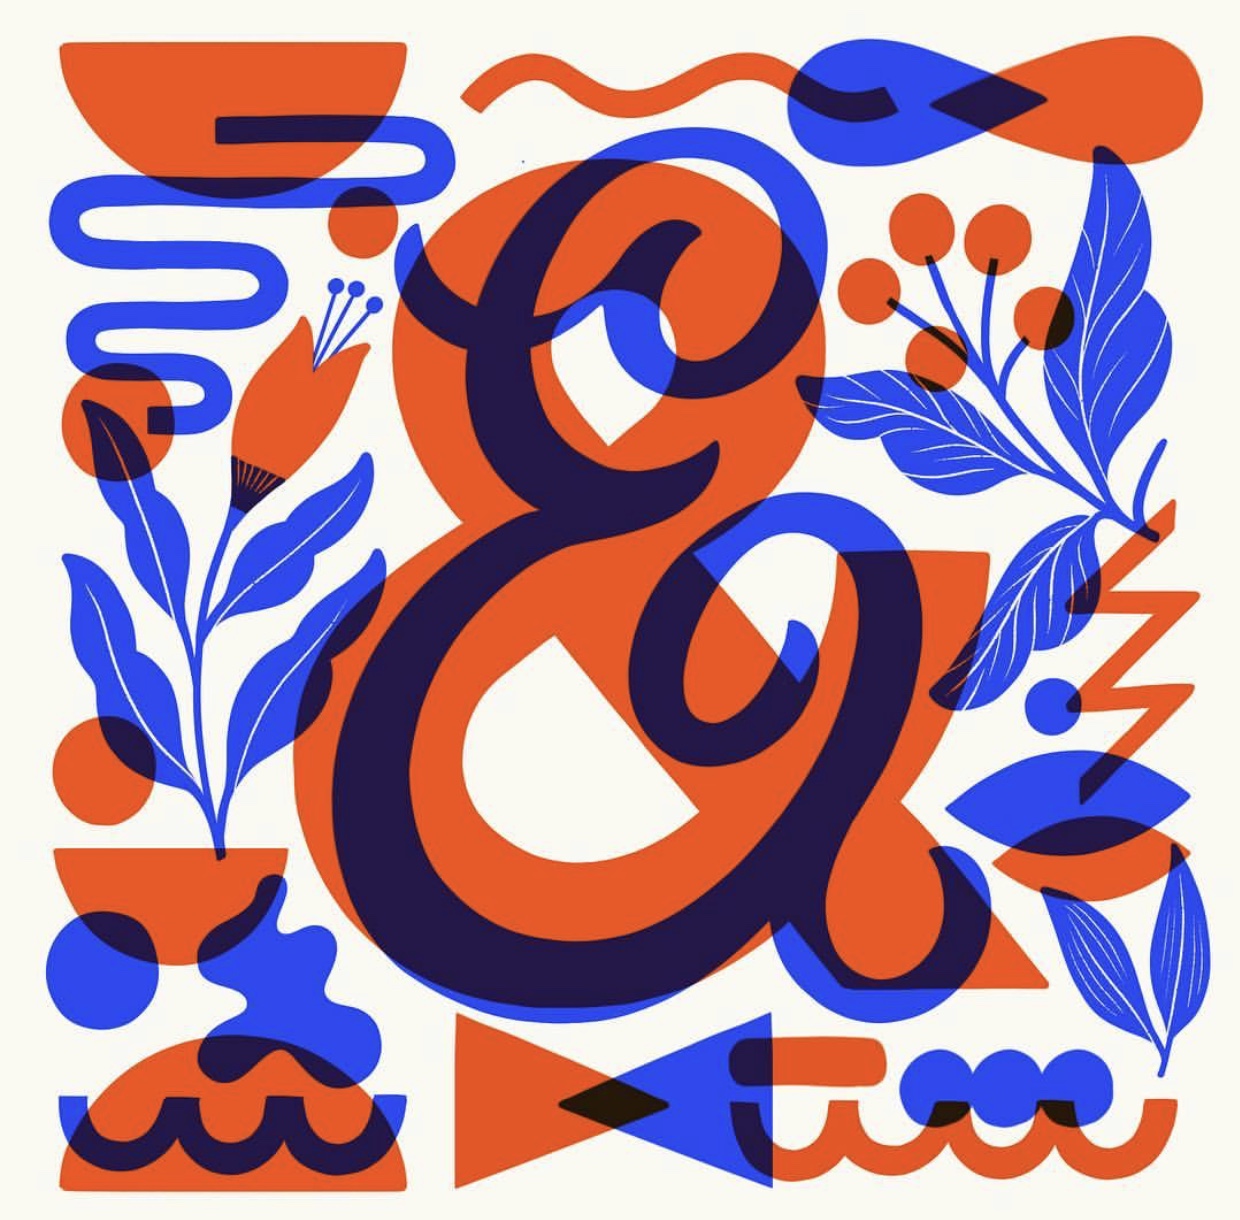 Blue and Orange Ampersands with Background Designs